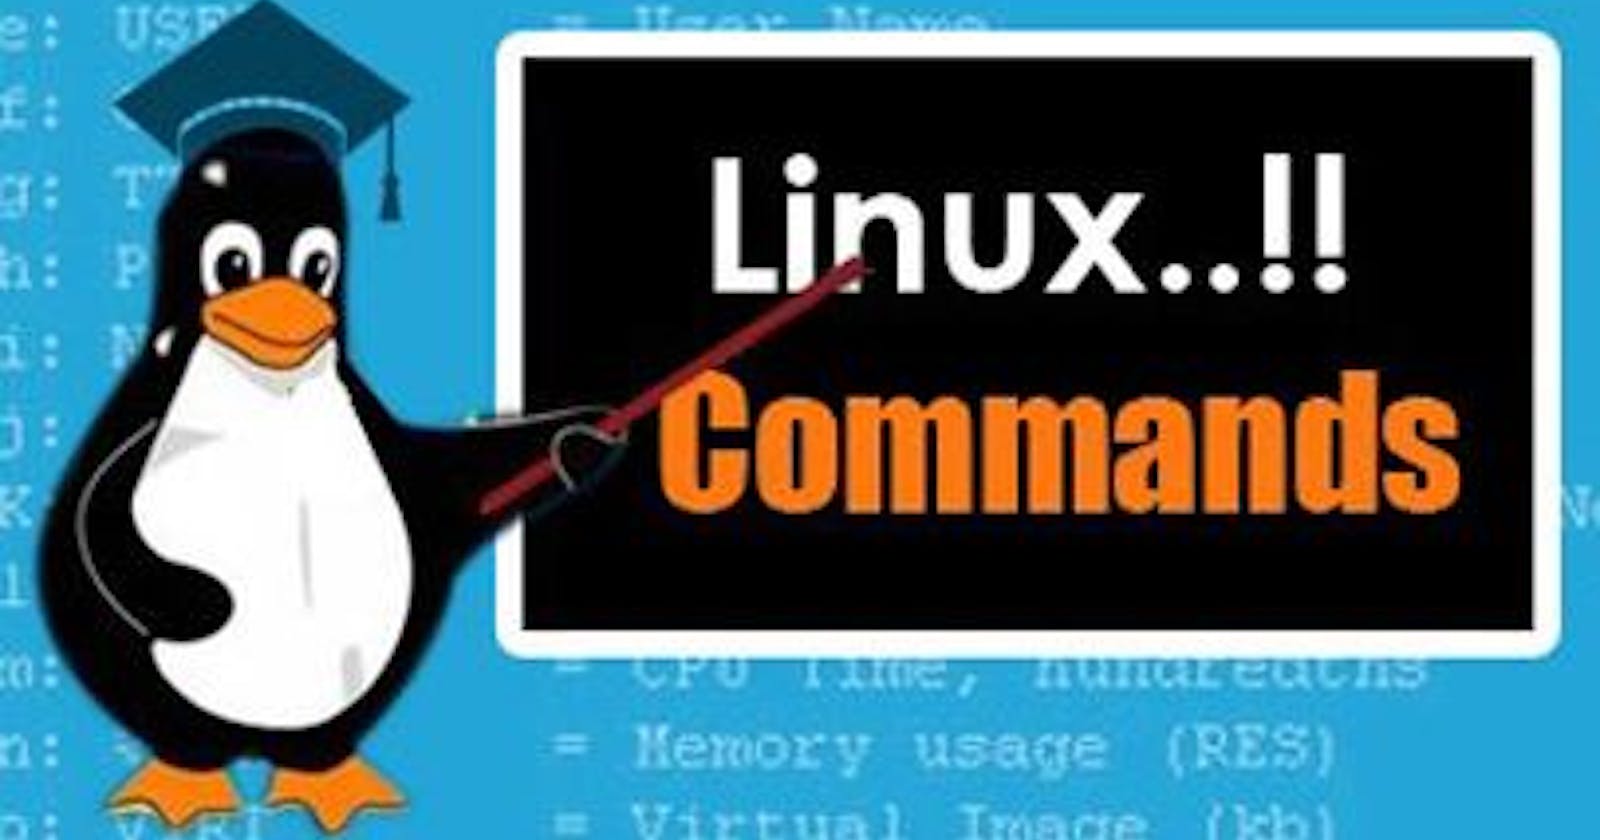 Day 4 - Basic Commands of Linux (cp, rm, mv)